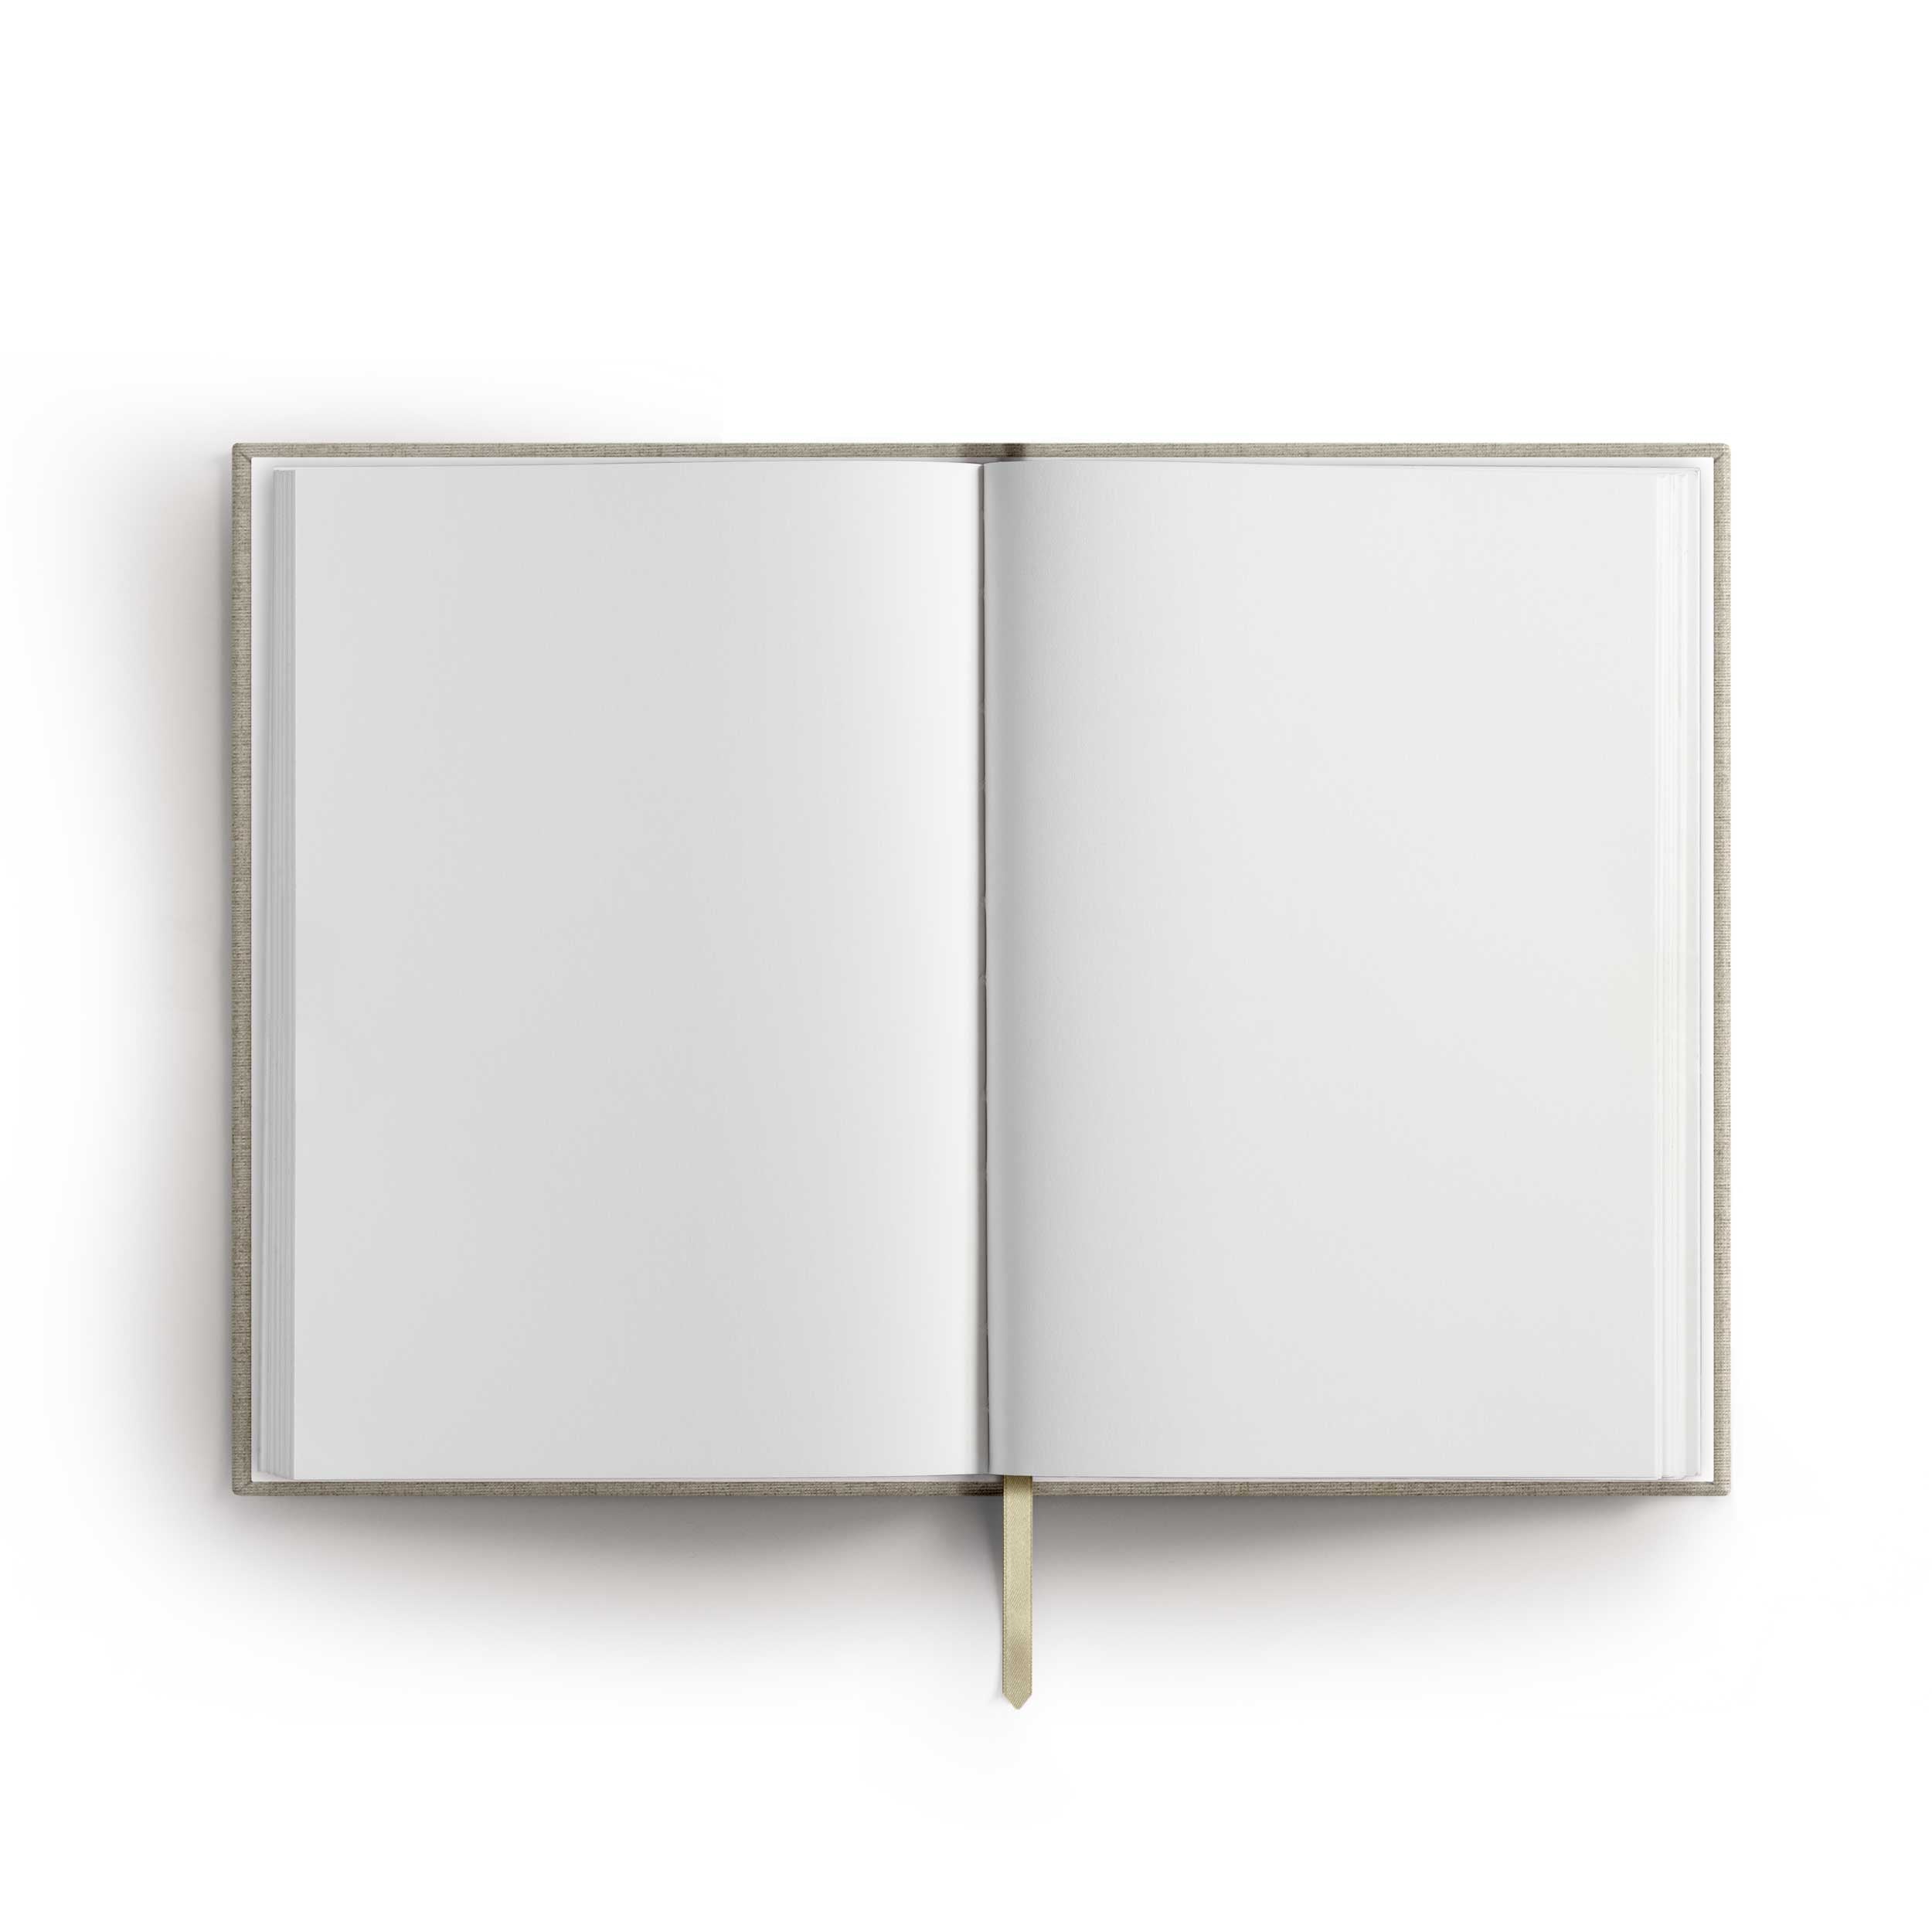 Notebook "Dream Chaser", A5, off-white / gold, linen